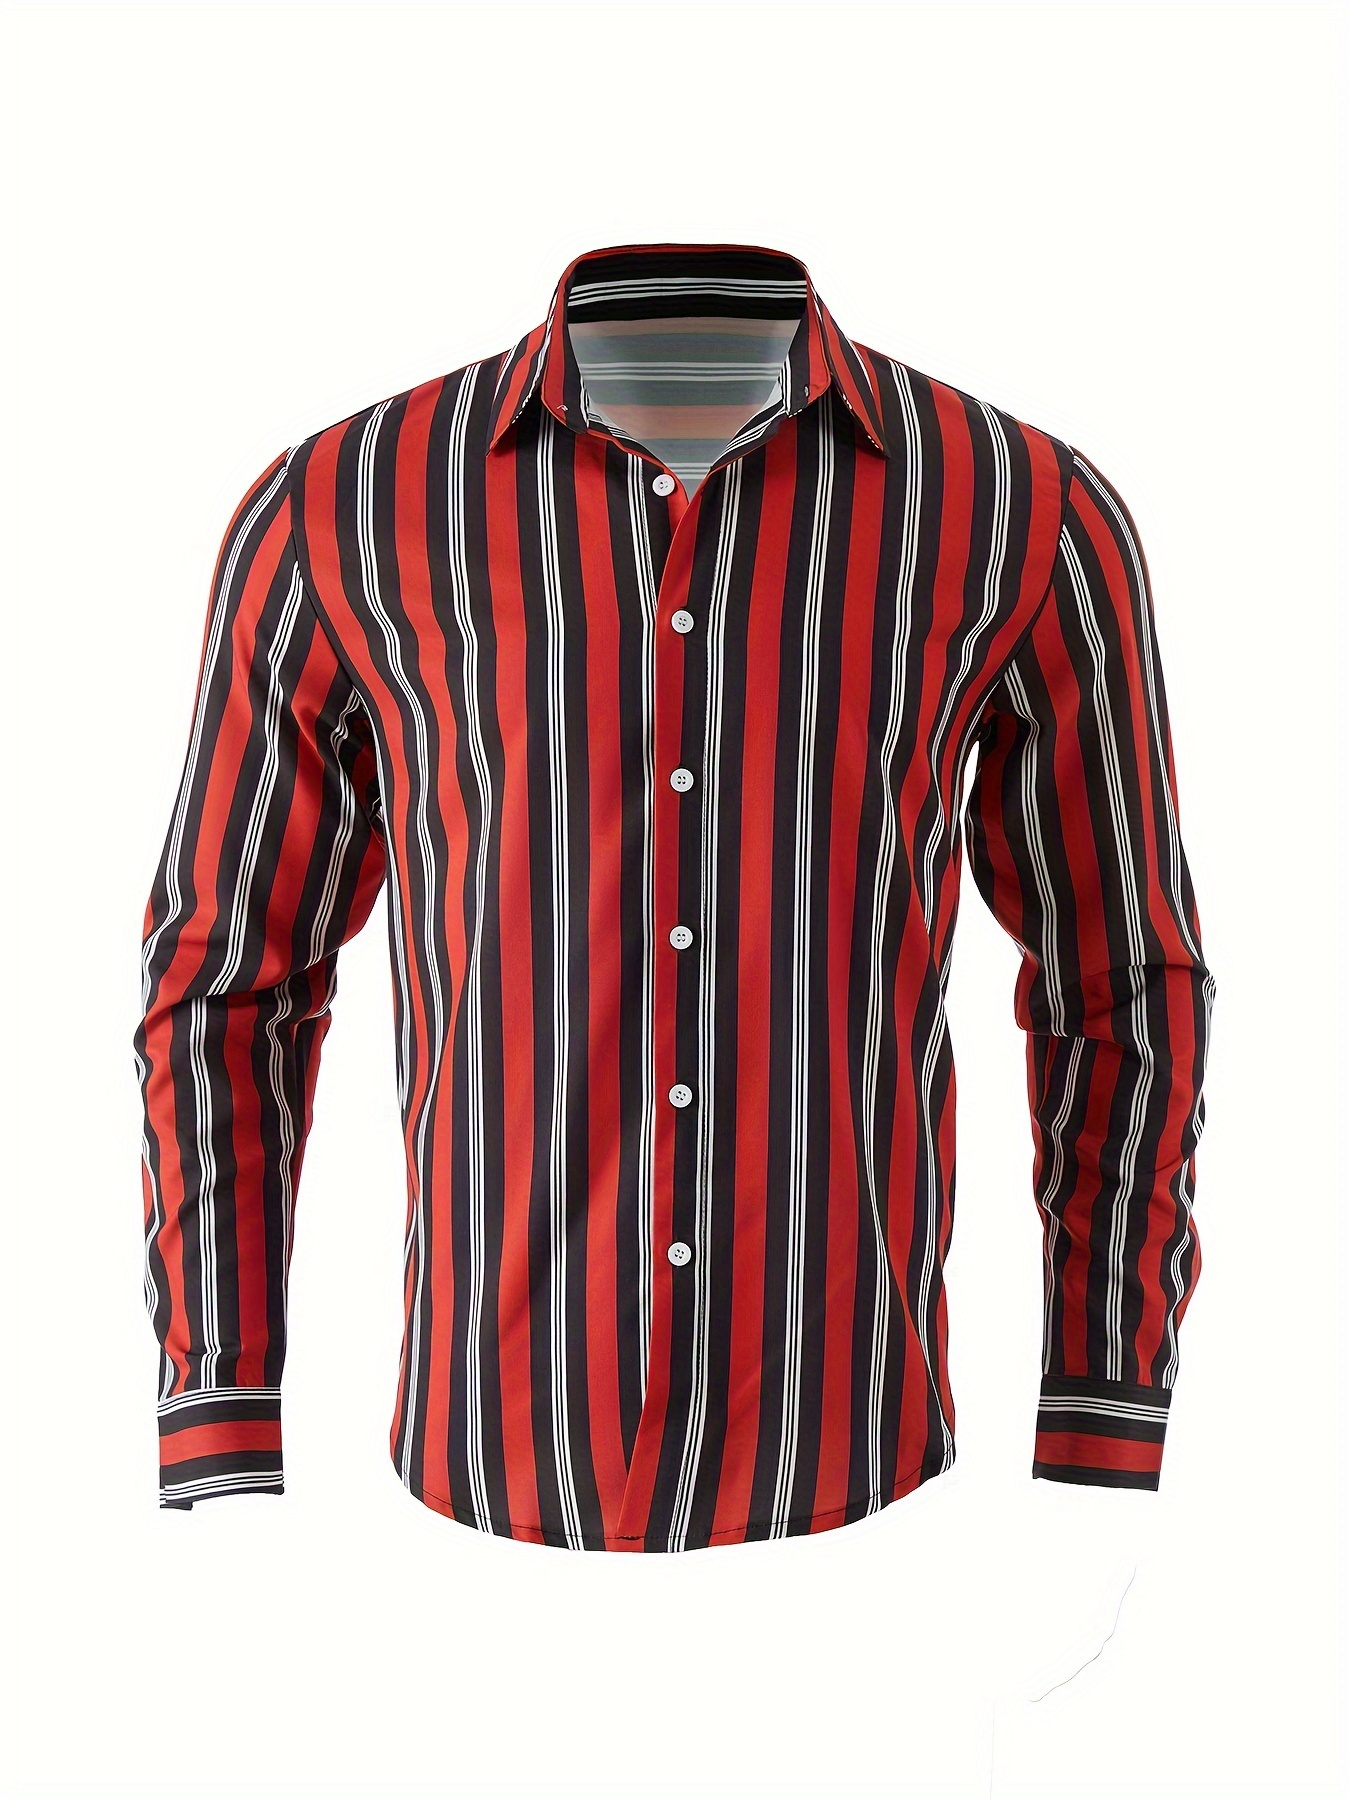 mens classic design striped long sleeve button up shirt for business occasions spring fall mens clothing details 20